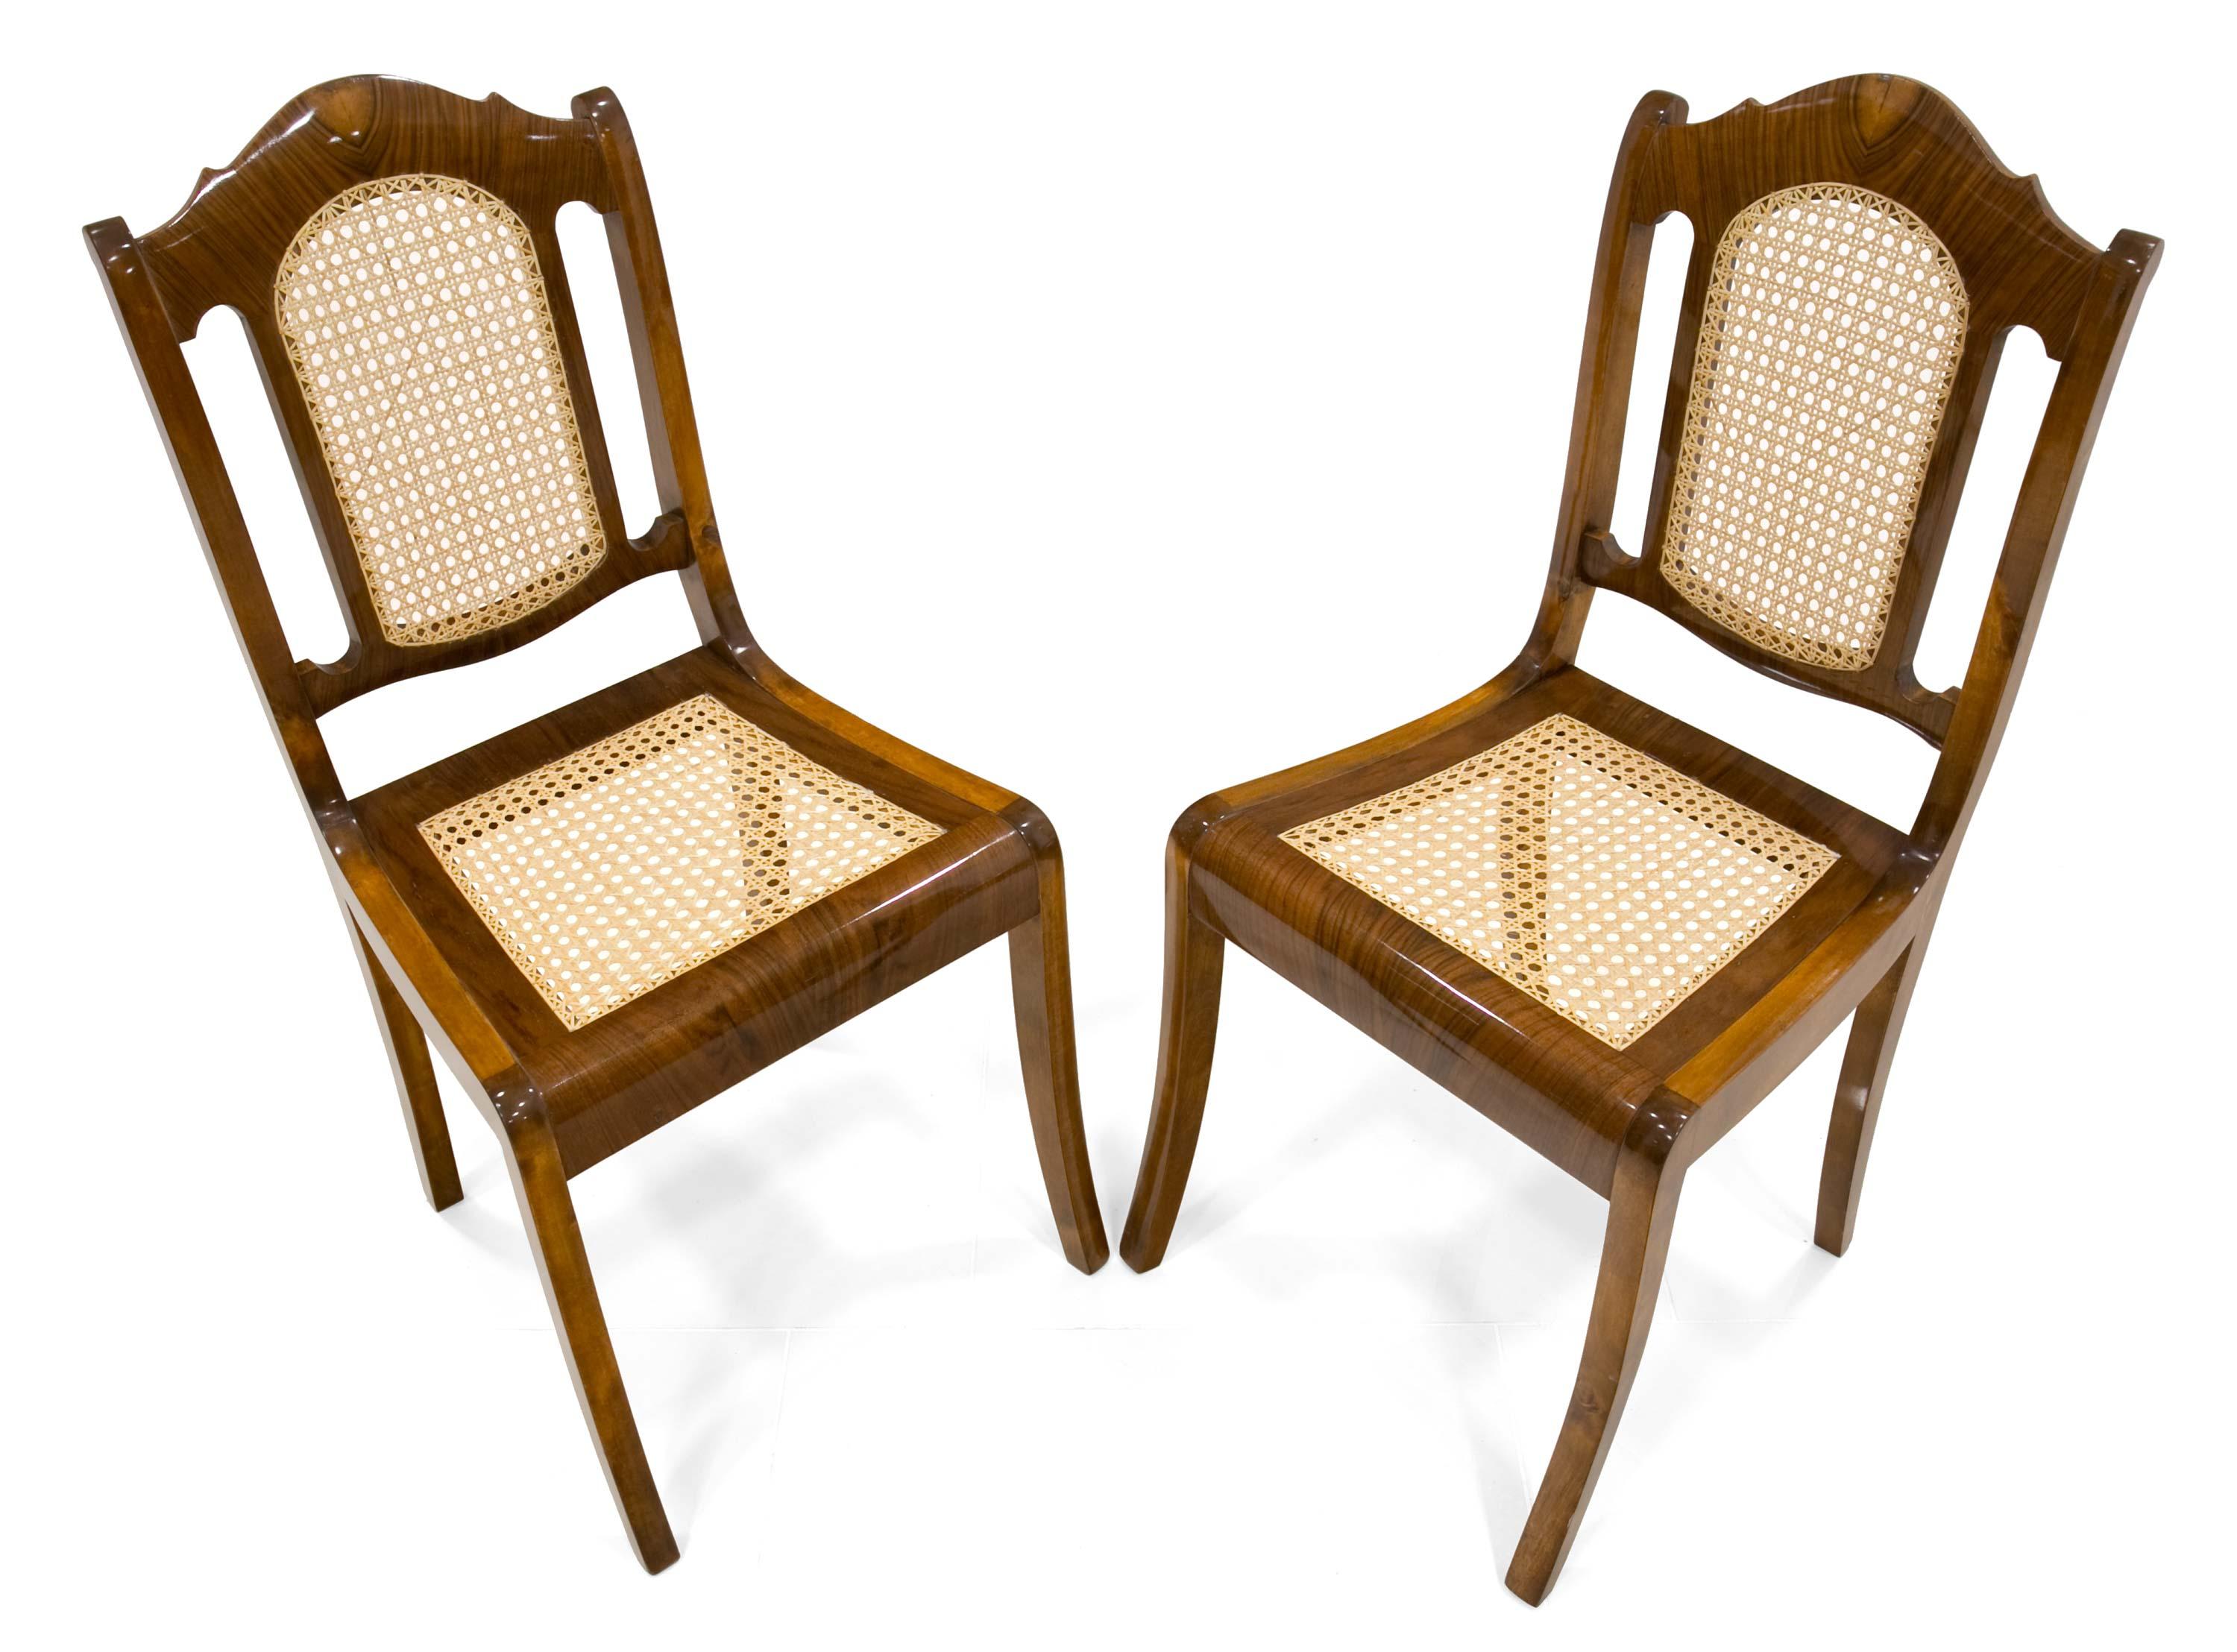 Two beautiful chairs in the Biedermeier style come from Germany, the middle of the 19th century. Made of walnut wood, partly on the seat and backrest veneered with walnut veneer. The set is after complete renovation, hand-polished. The seat and